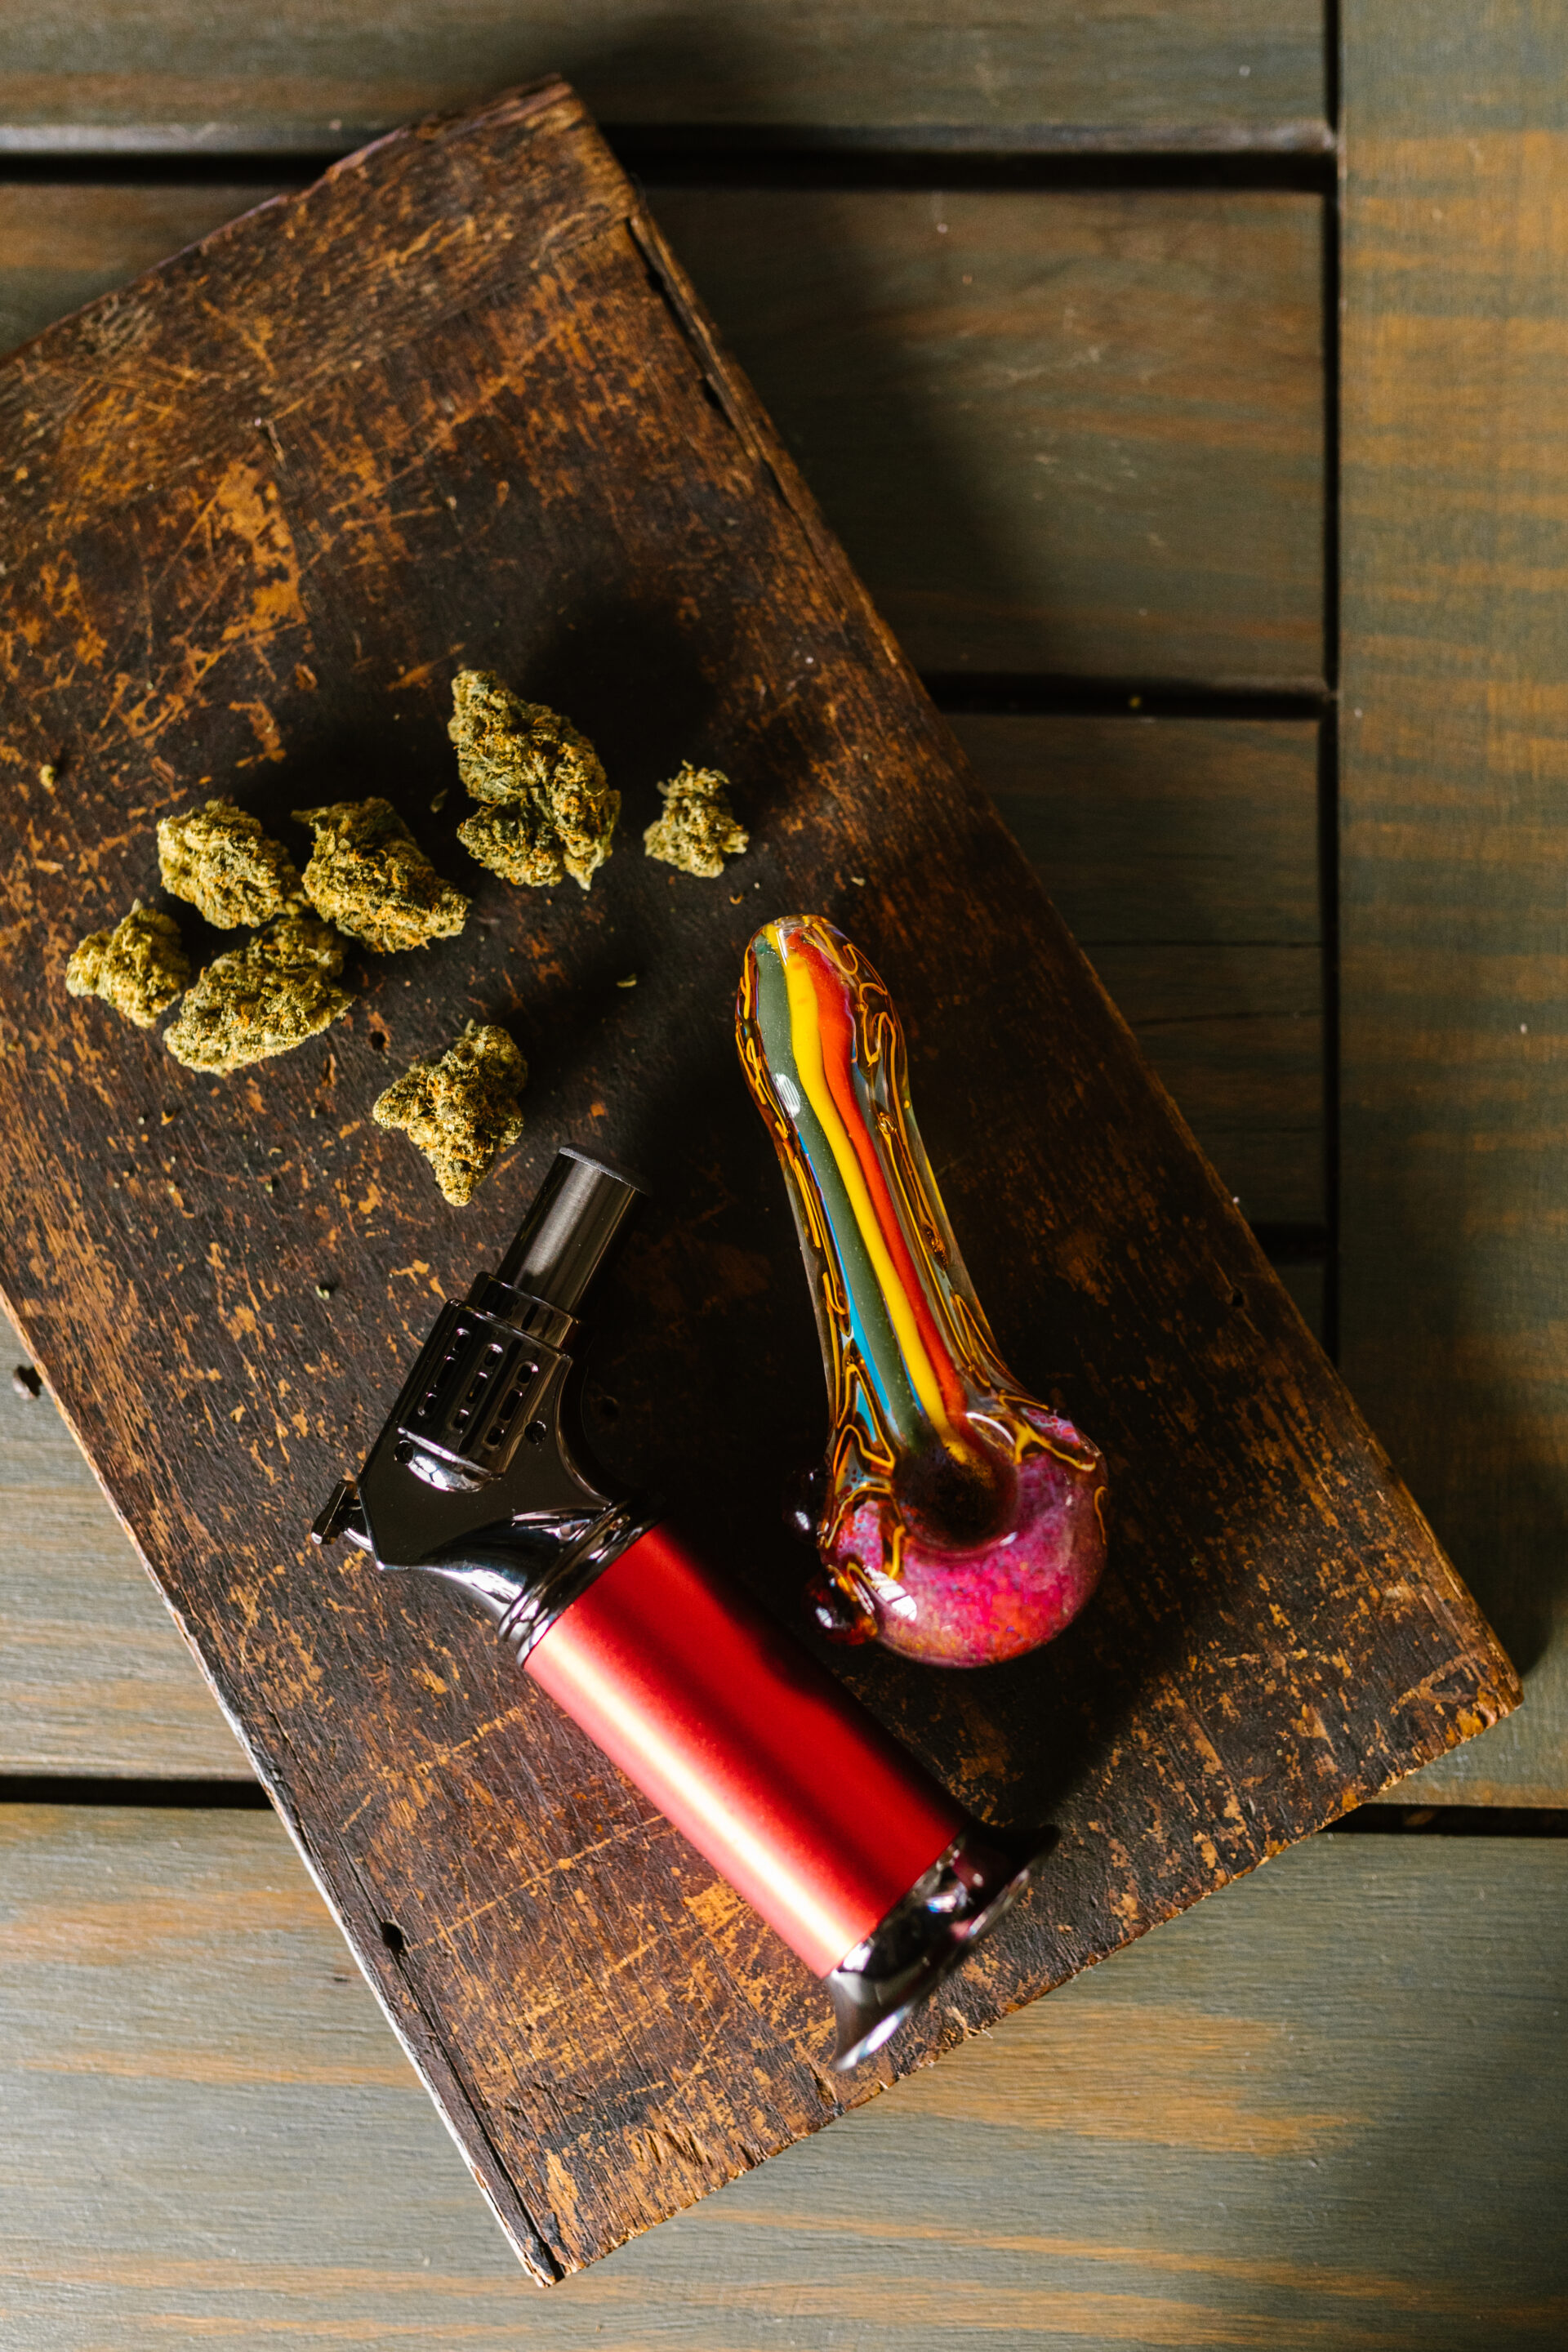 cannabis party for couples, Wood people art dark, couples cannabis party, cannabis party ideas, marijuana party ideas, cannabis party, cannabis party ideas, marijuana party ideas, host a CBD party, marijuana party supplies, stoner party, throwing a cannabis party, cannabis pleasure party, cannabis home parties, 420 party food ideas, infused dinner party names, out party ideas, throwing a 4 20 party, party ideas, stoner party ideas, weed party decorations, diy 420 decorations, 420 party ideas, 420 decorations, marijuana party supplies, marijuana themed party ideas, marijuana birthday party ideas